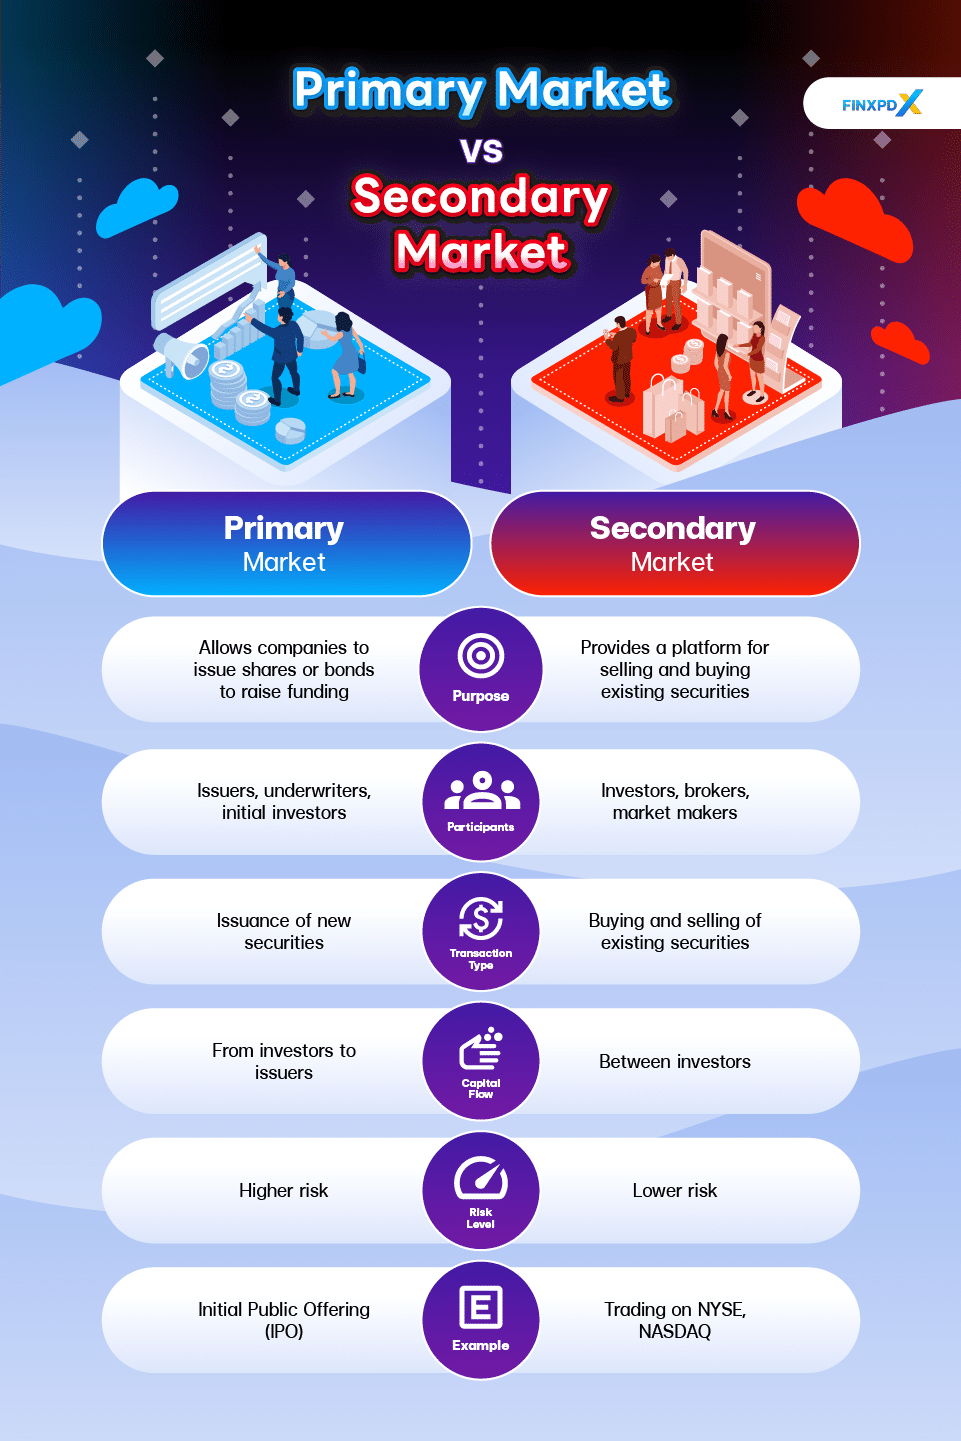 Primary Market and Secondary Market info